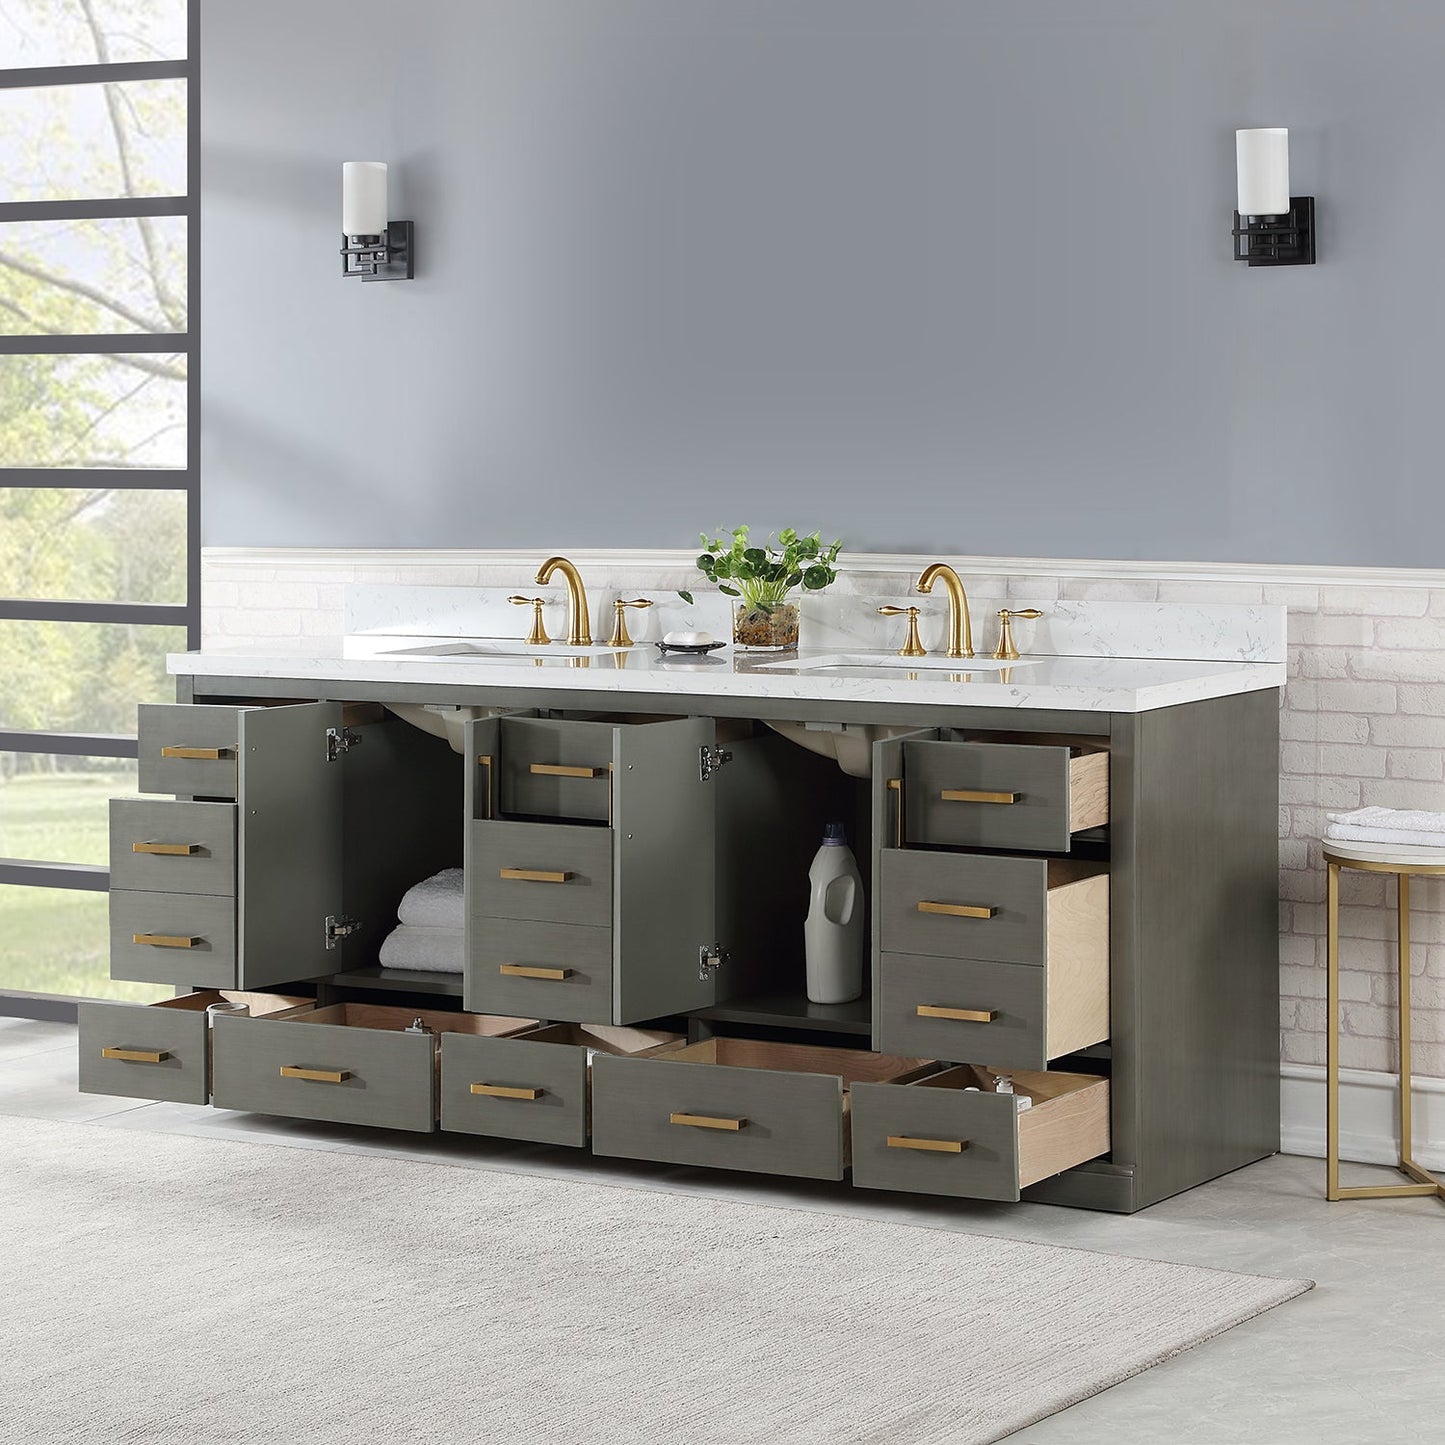 Monna 84" Double Bathroom Vanity Set in Gray Pine with Aosta White Composite Stone Countertop without Mirror